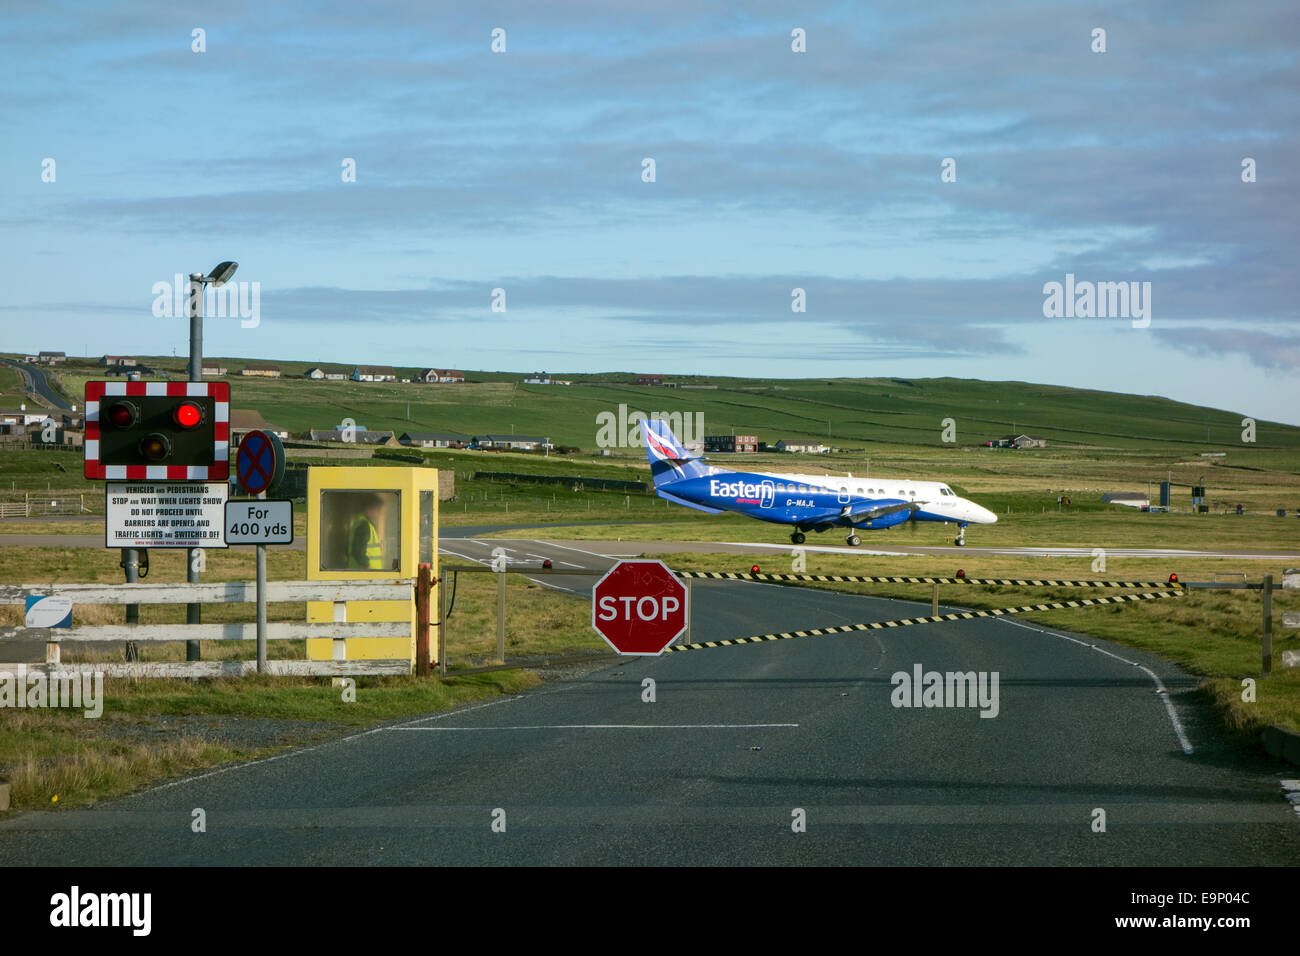 Road closed at Sumburgh airport to allow plane to take off, Sumburgh, Shetland Islands Stock Photo